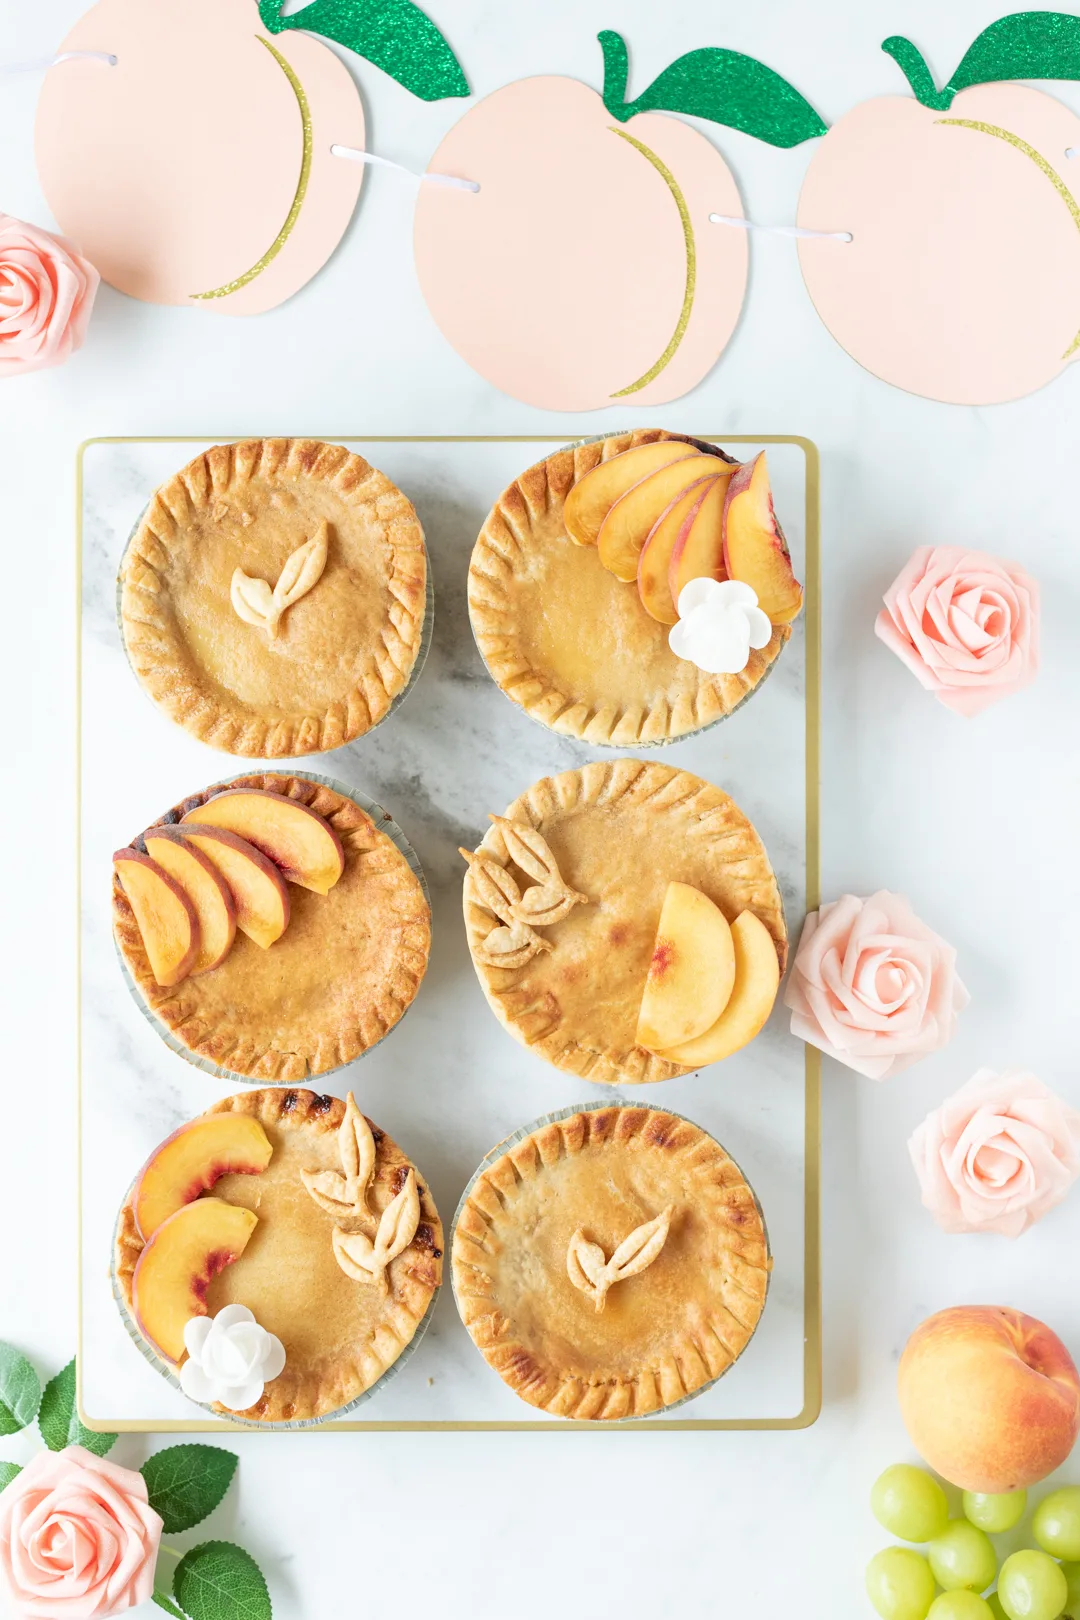 pies set out on a rectangular platter with peach colored decorations like faux flowers and peach banner.